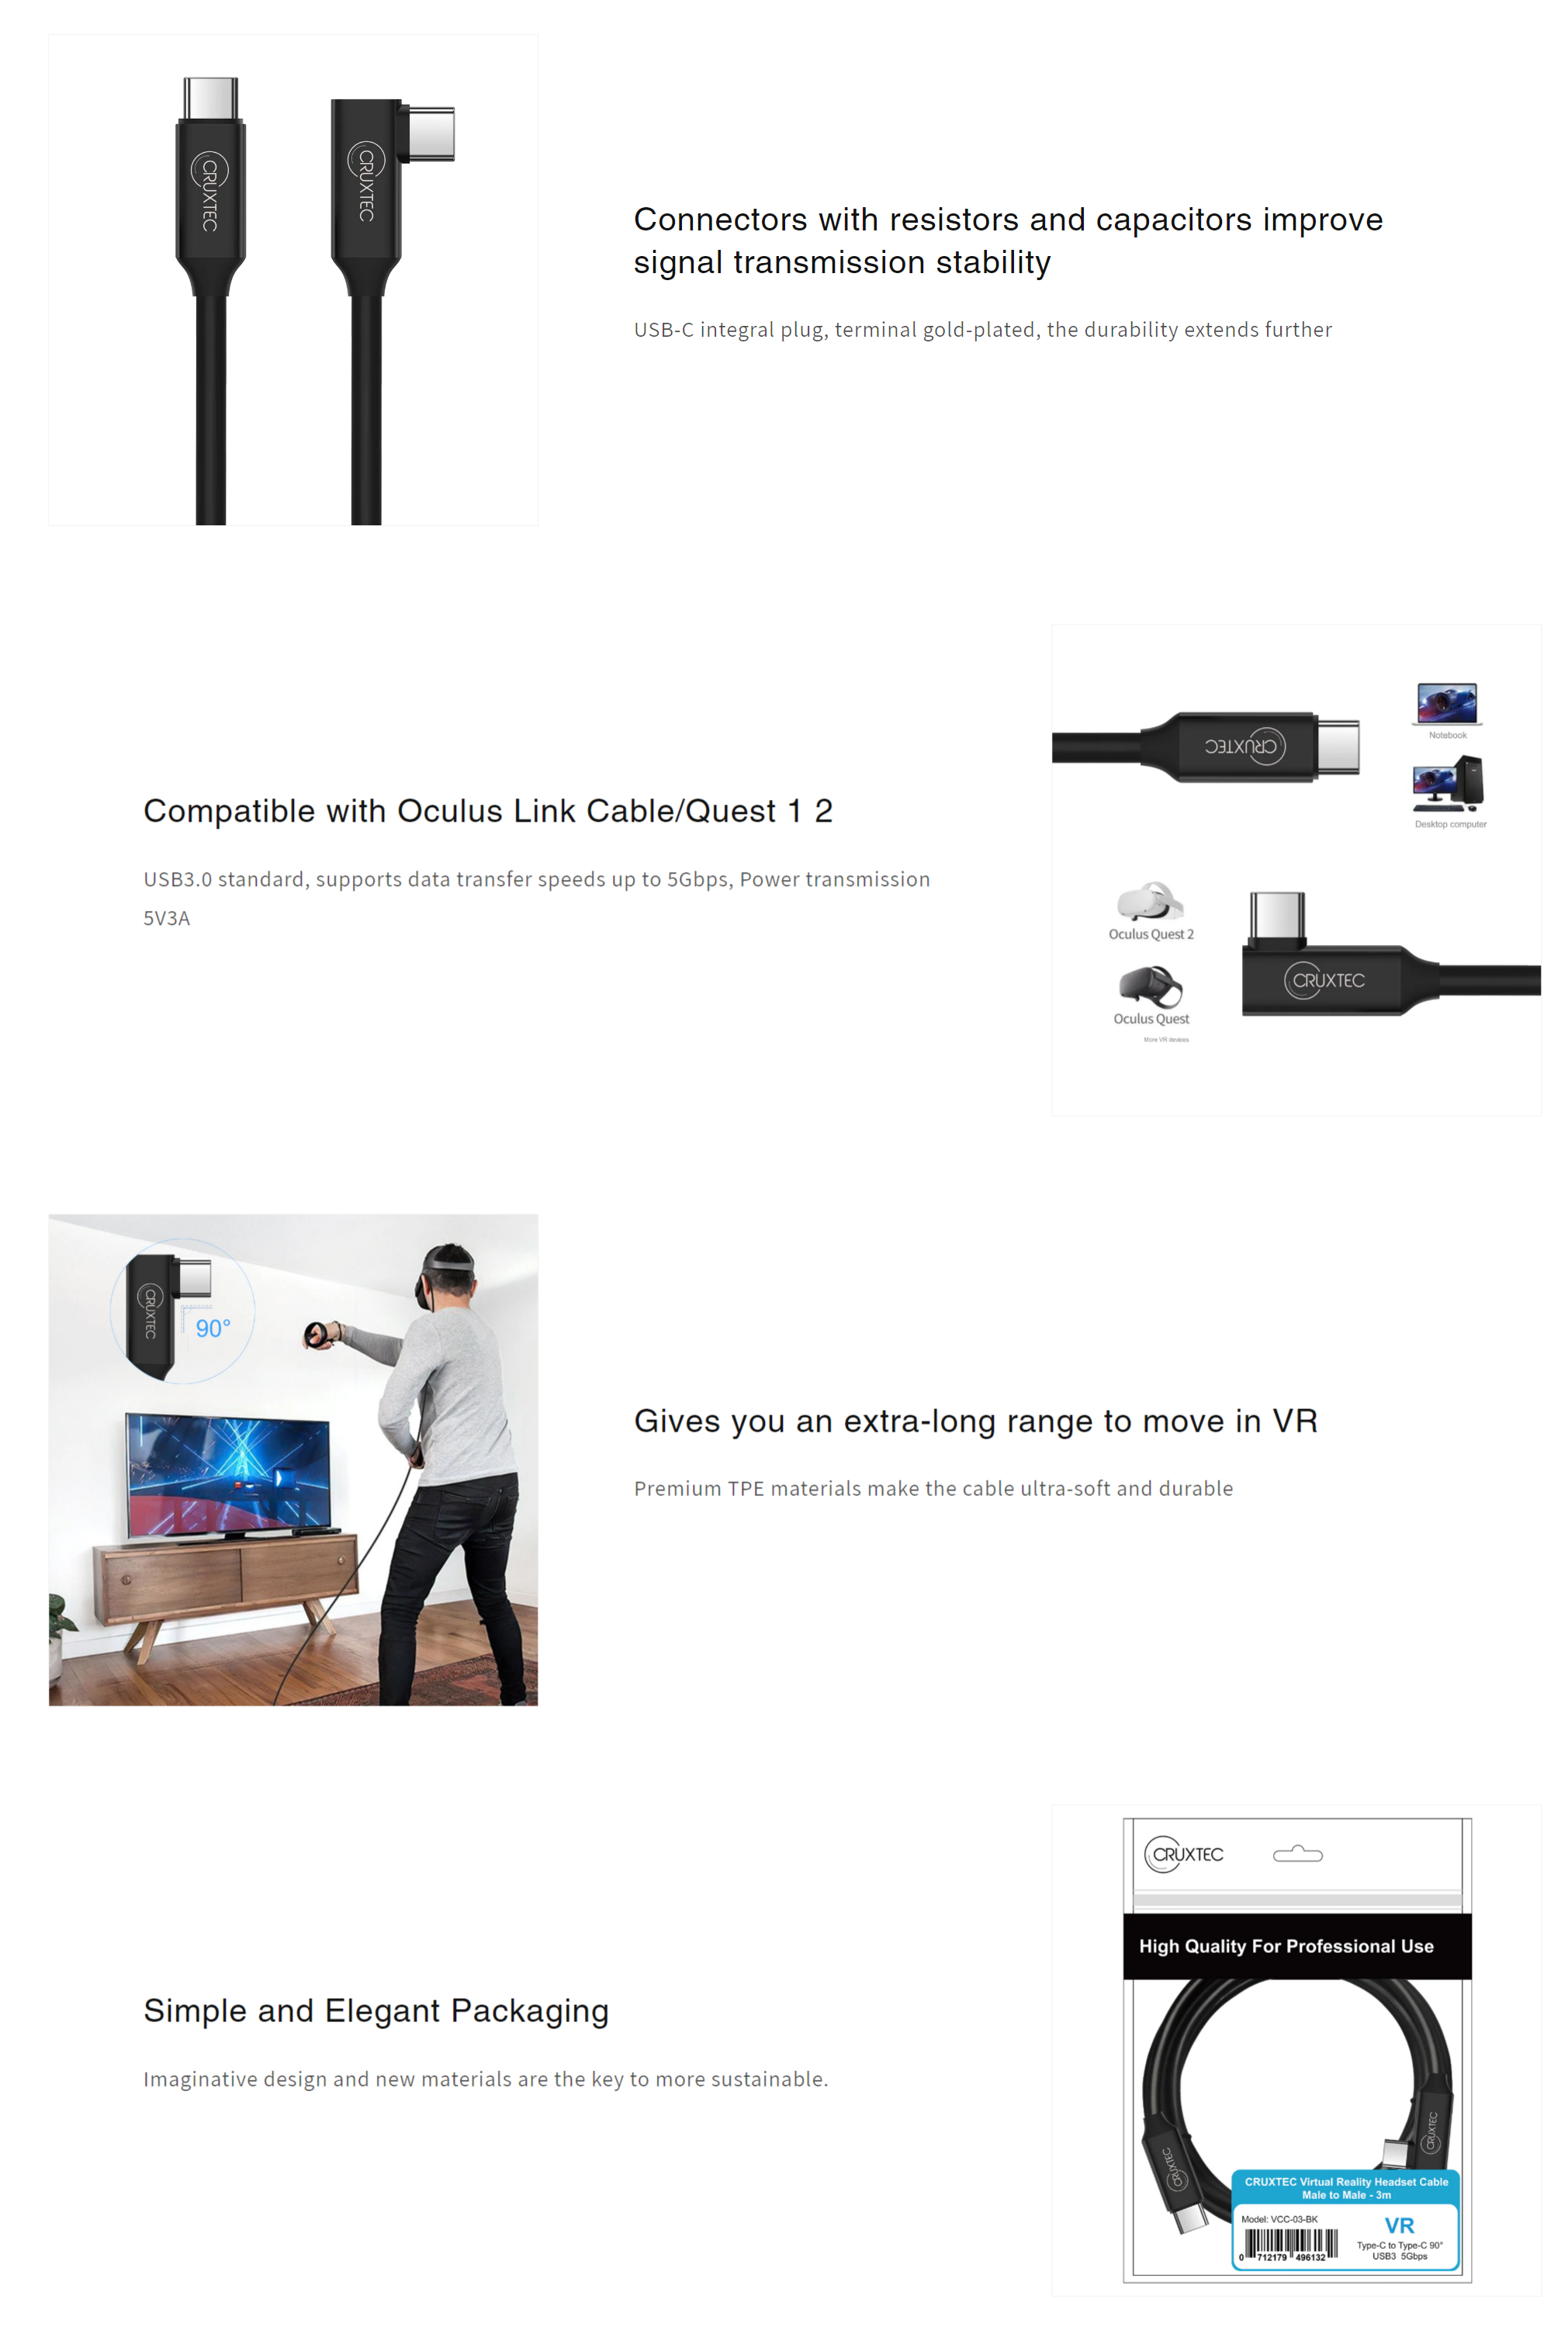 A large marketing image providing additional information about the product Cruxtec USB-C to USB-C 90 Degree Angle VR Cable - 3m - Additional alt info not provided